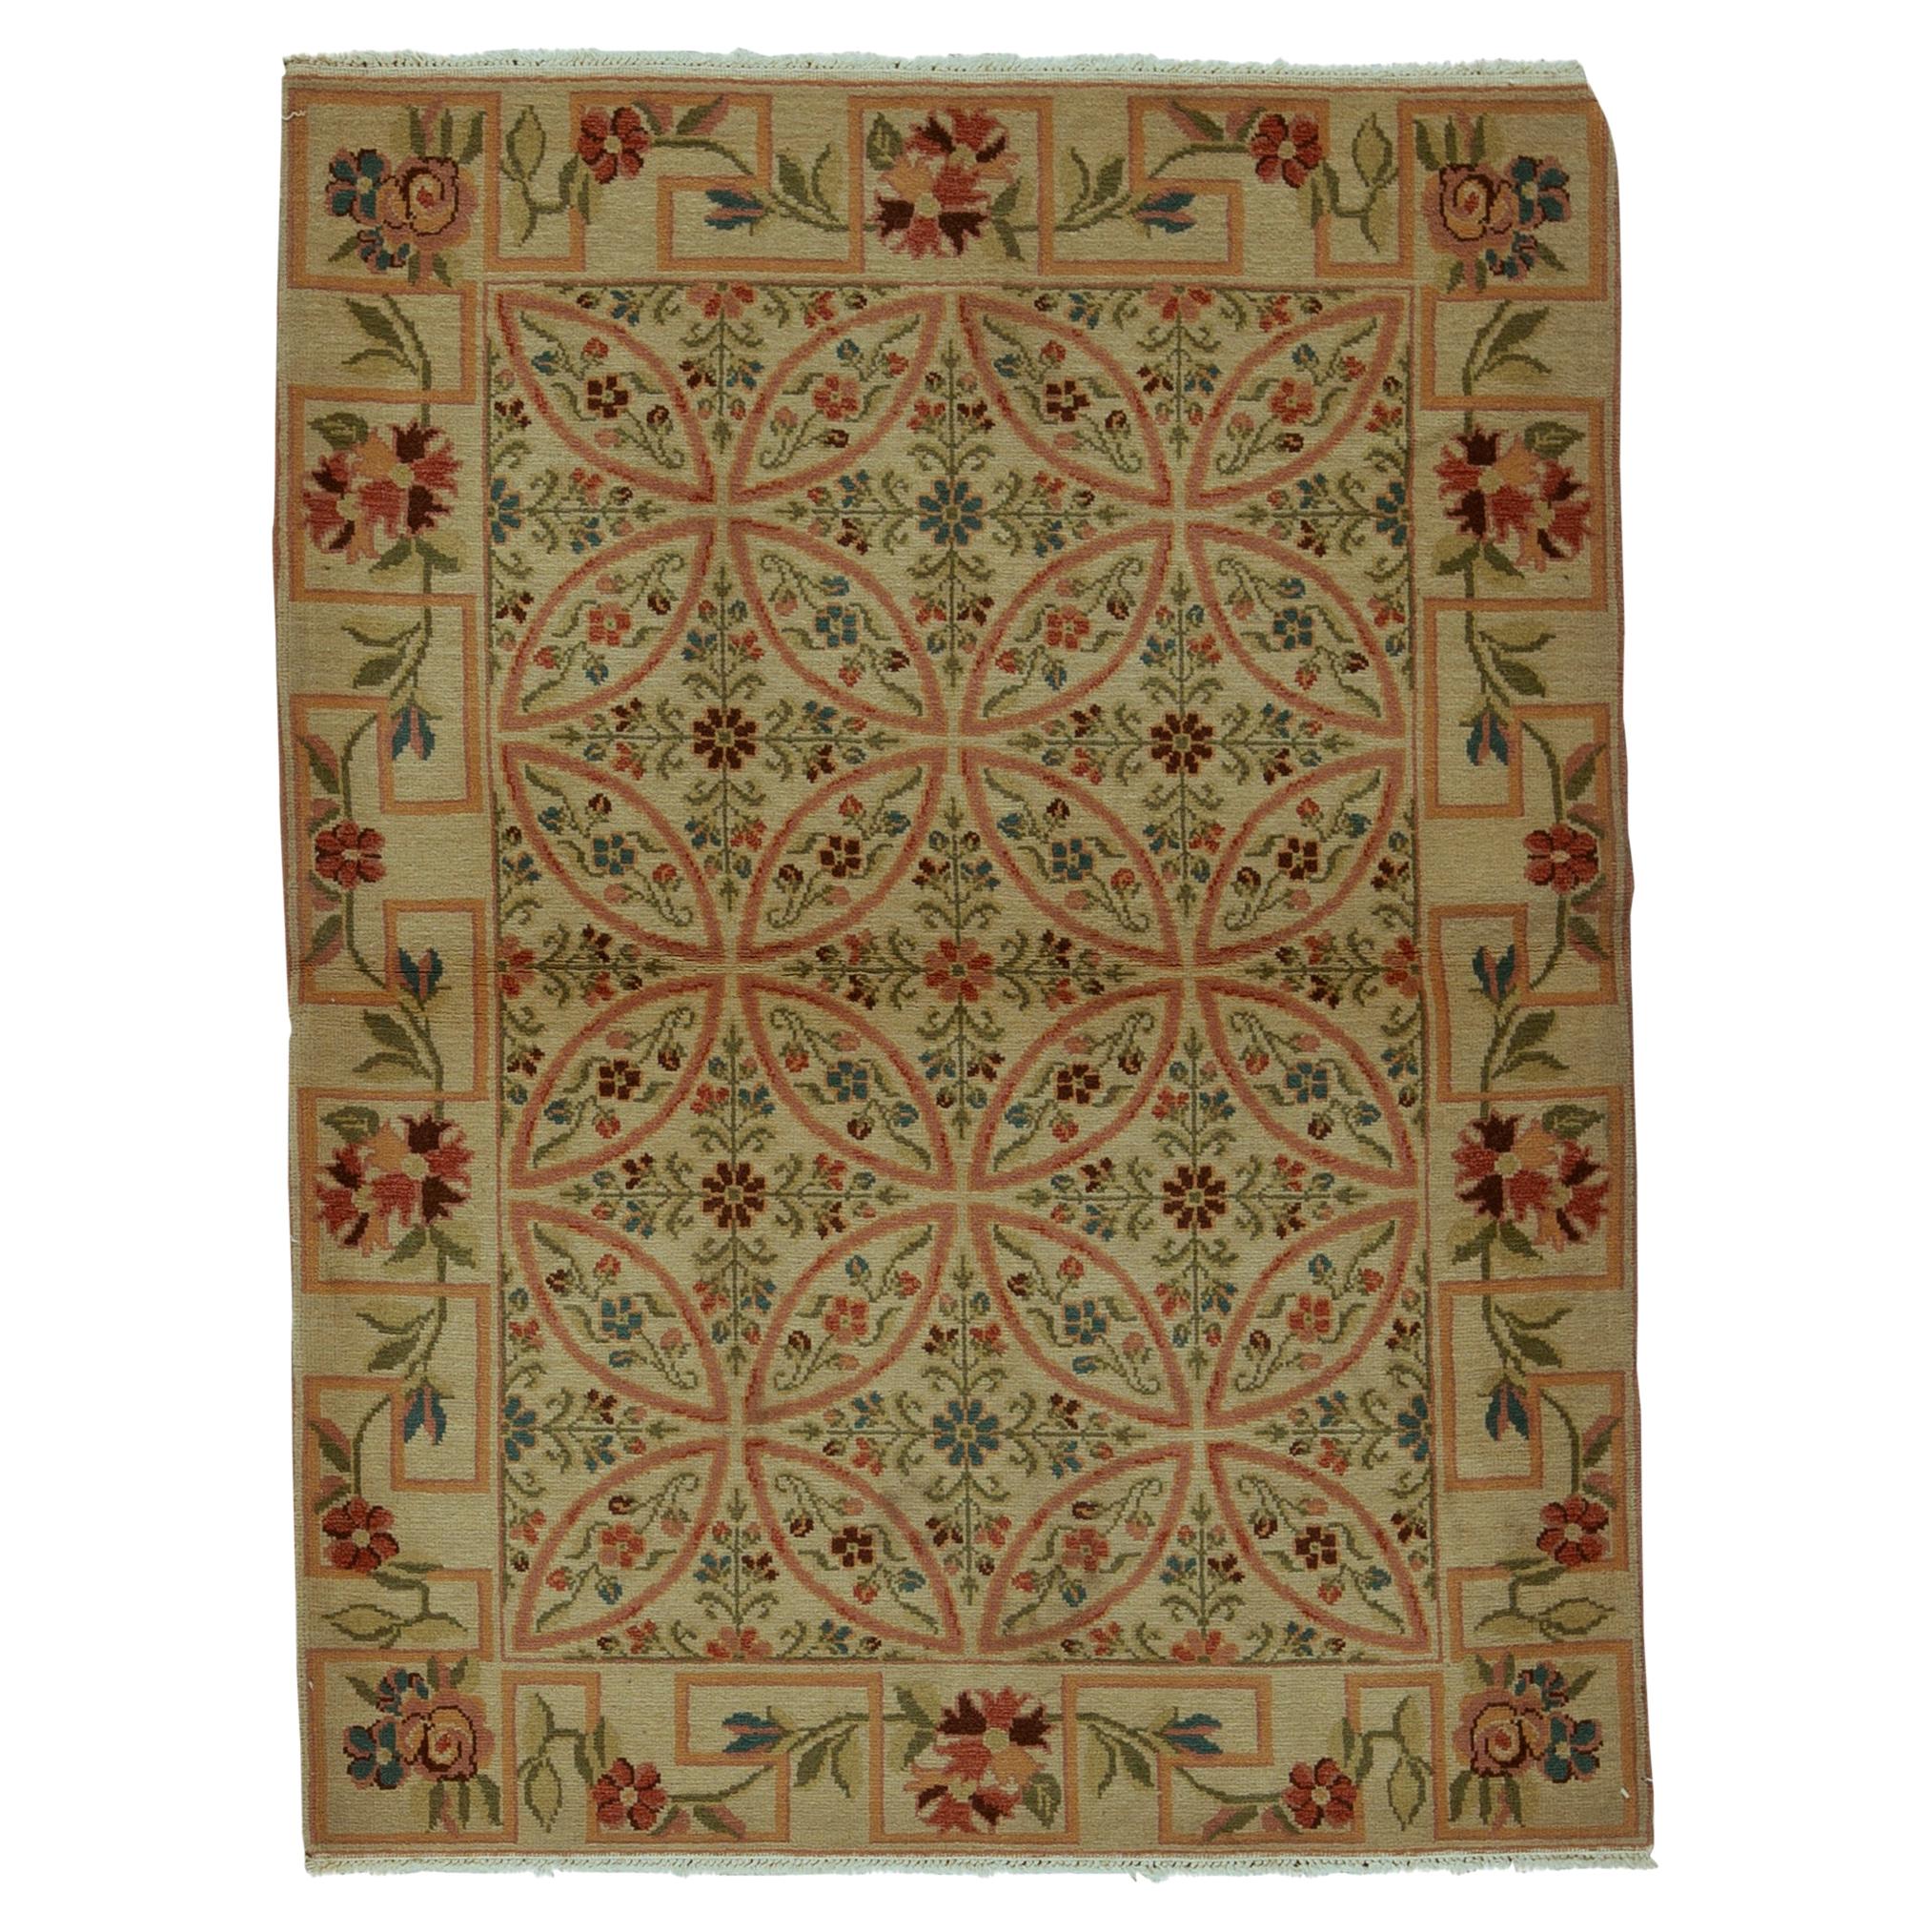  Traditional Handwoven Luxury Wool Semi Antique Ivory Rug.